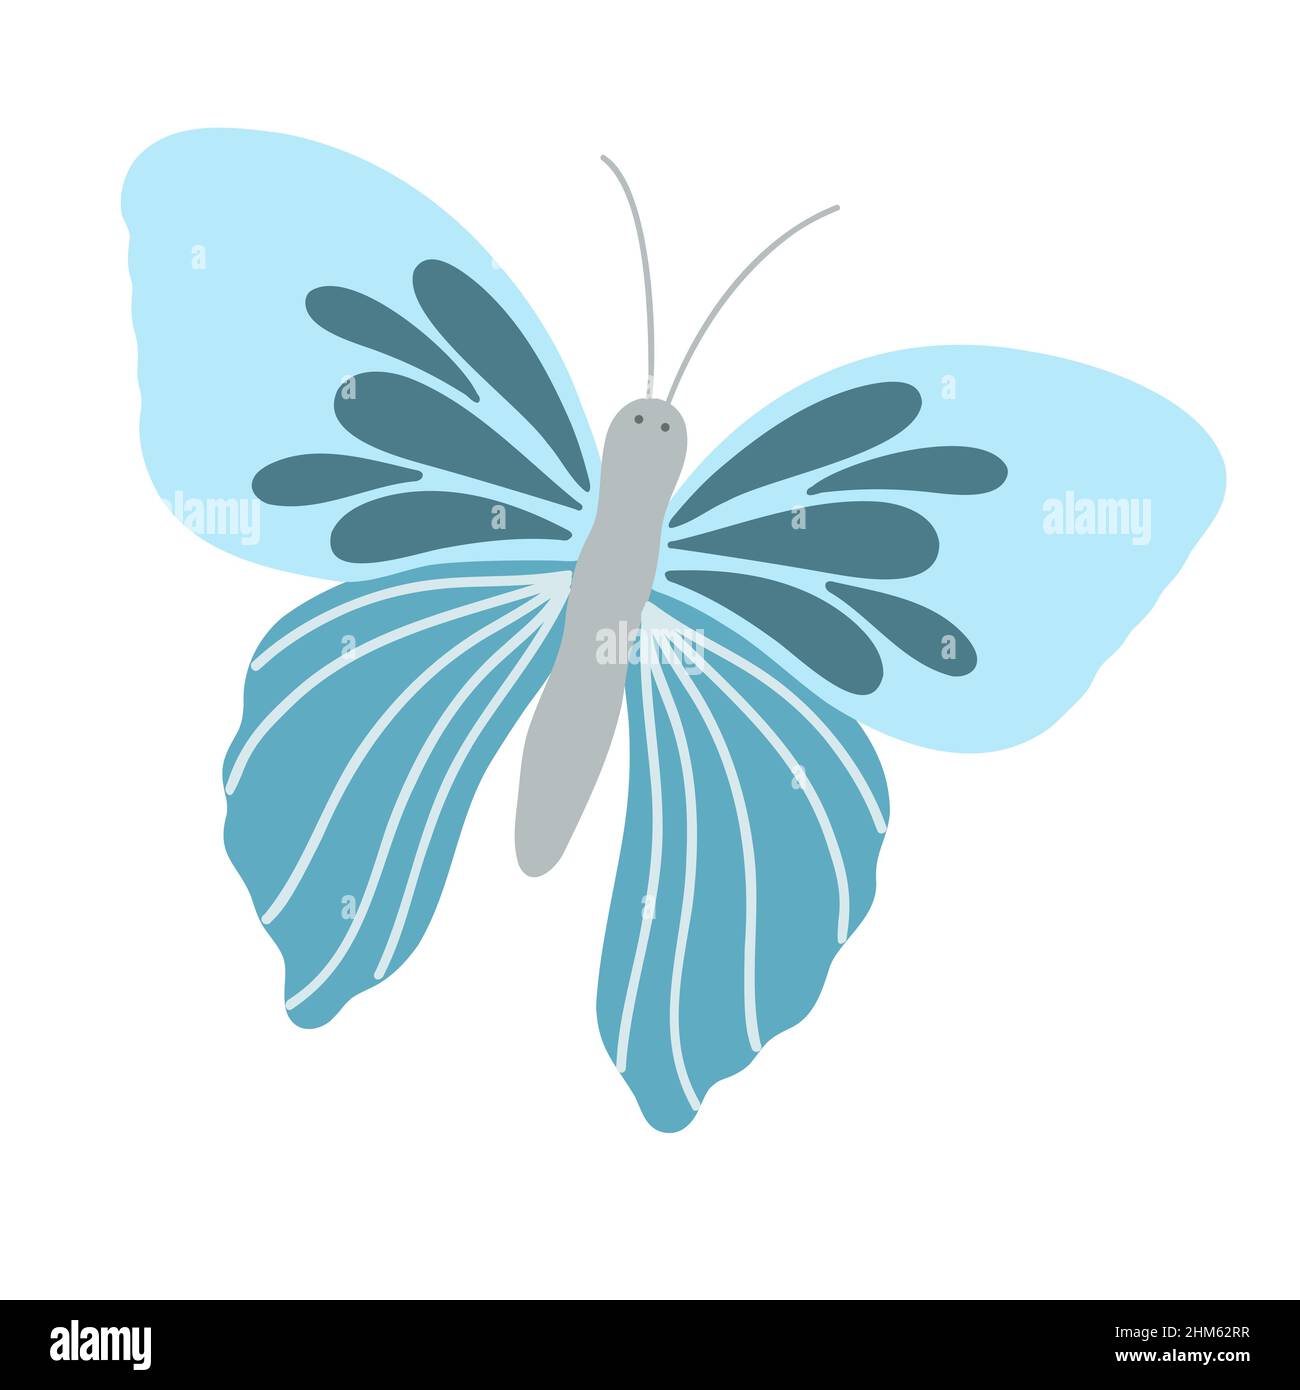 Fancy little colorful butterfly in simple flat style vector illustration, symbol of Easter holidays, spring or summer, celebration decor, clipart for cards, banner, springtime decoration, cute insect Stock Vector